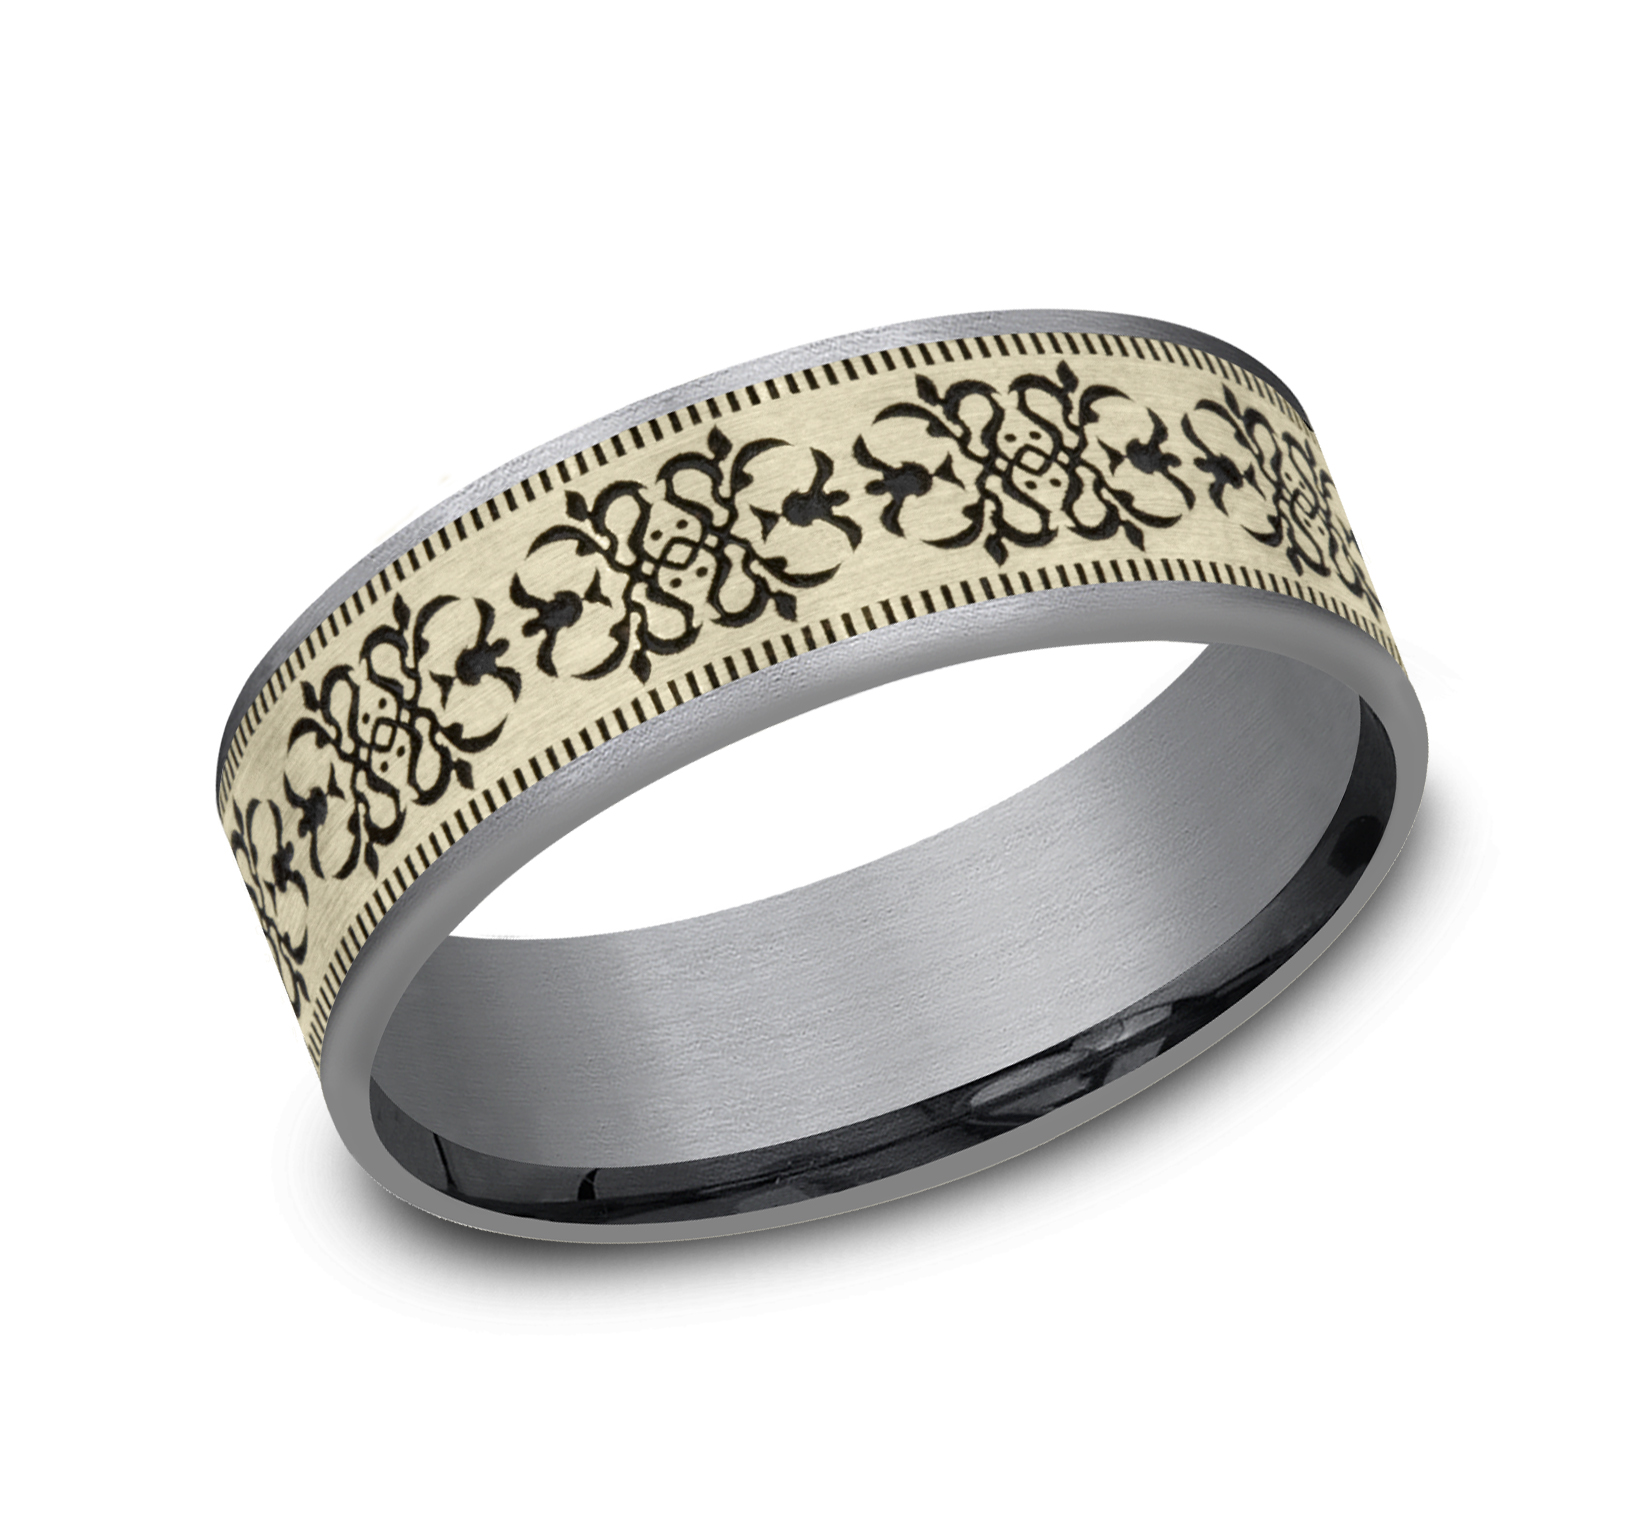 Tantalum Men's Band with Baroque Patterned 14k Yellow Gold Center, 7.5mm